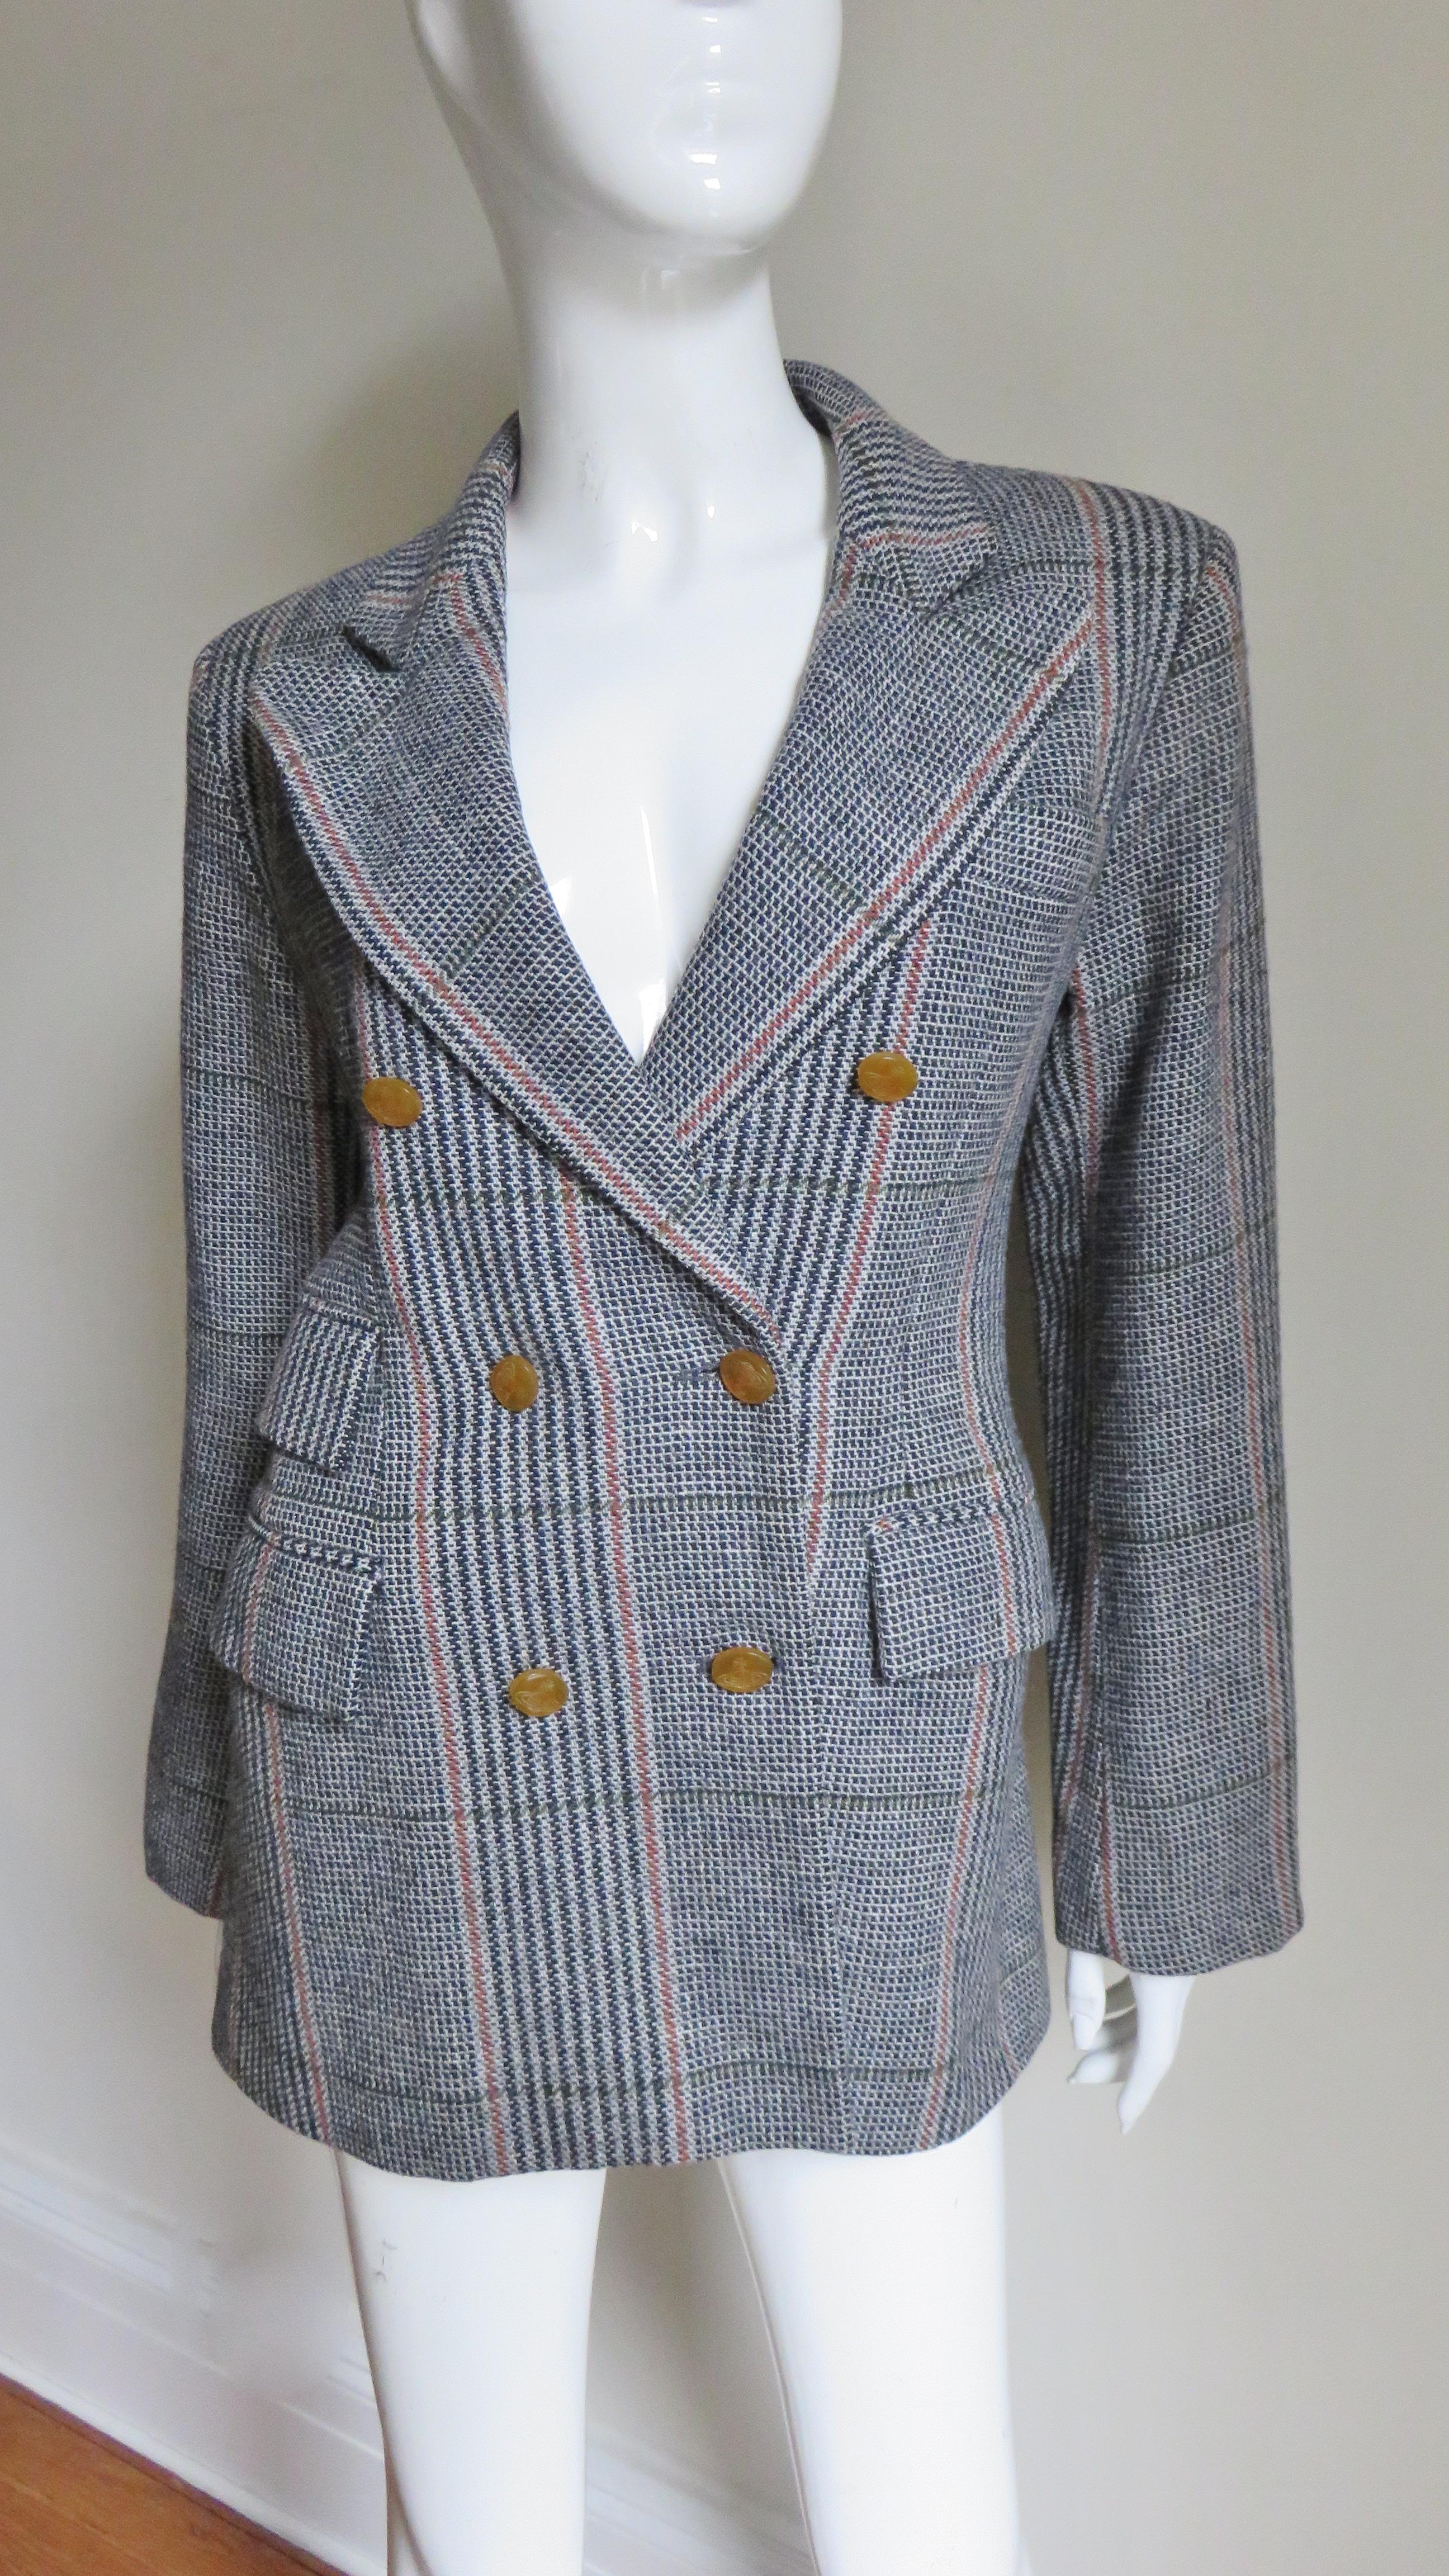 A great black, grey and tan plaid wool jacket by Vivienne Westwood from her red label collection.  It is double breasted with signature orb etched tan colored buttons along the front and on each cuff.  It has peak lapels, slight shoulder padding, 2